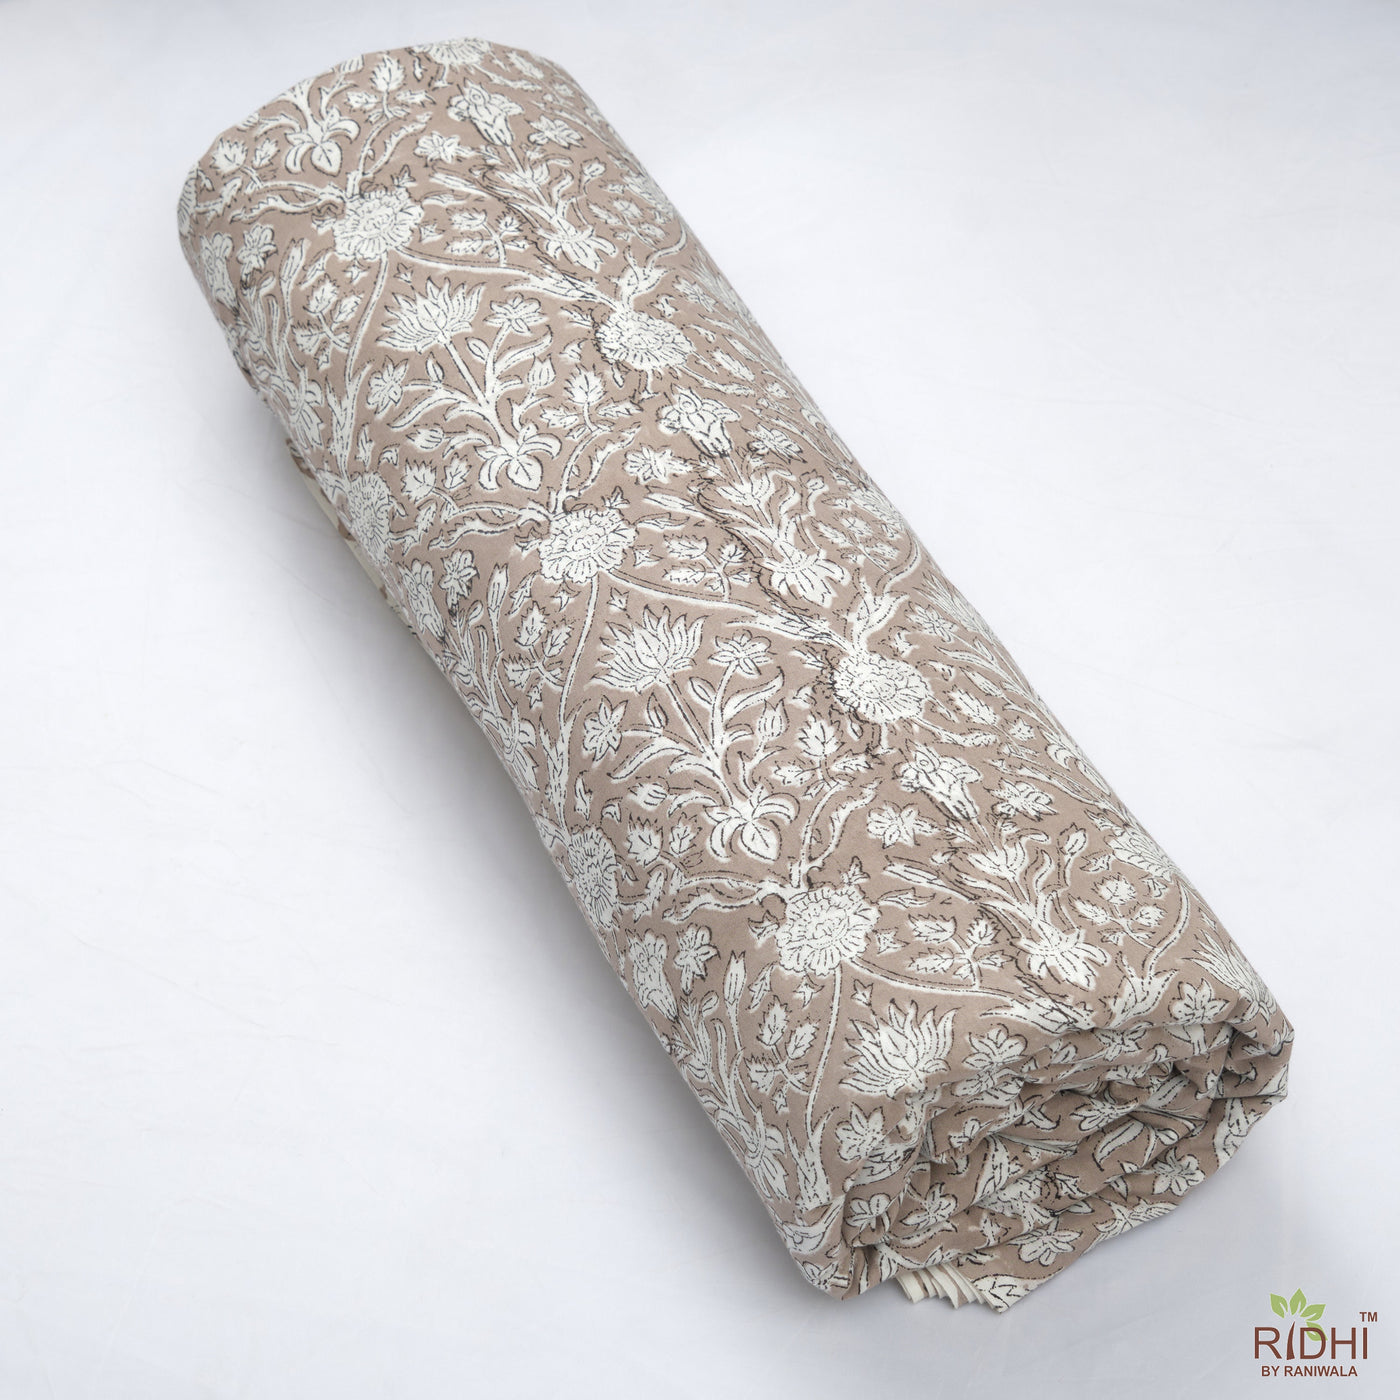 Taupe Color Floral Indian Hand Block Print 100% Pure Cotton Cloth, Fabric by the yard, Women's Clothing Curtains Duvet Cover Pillowcase Bag